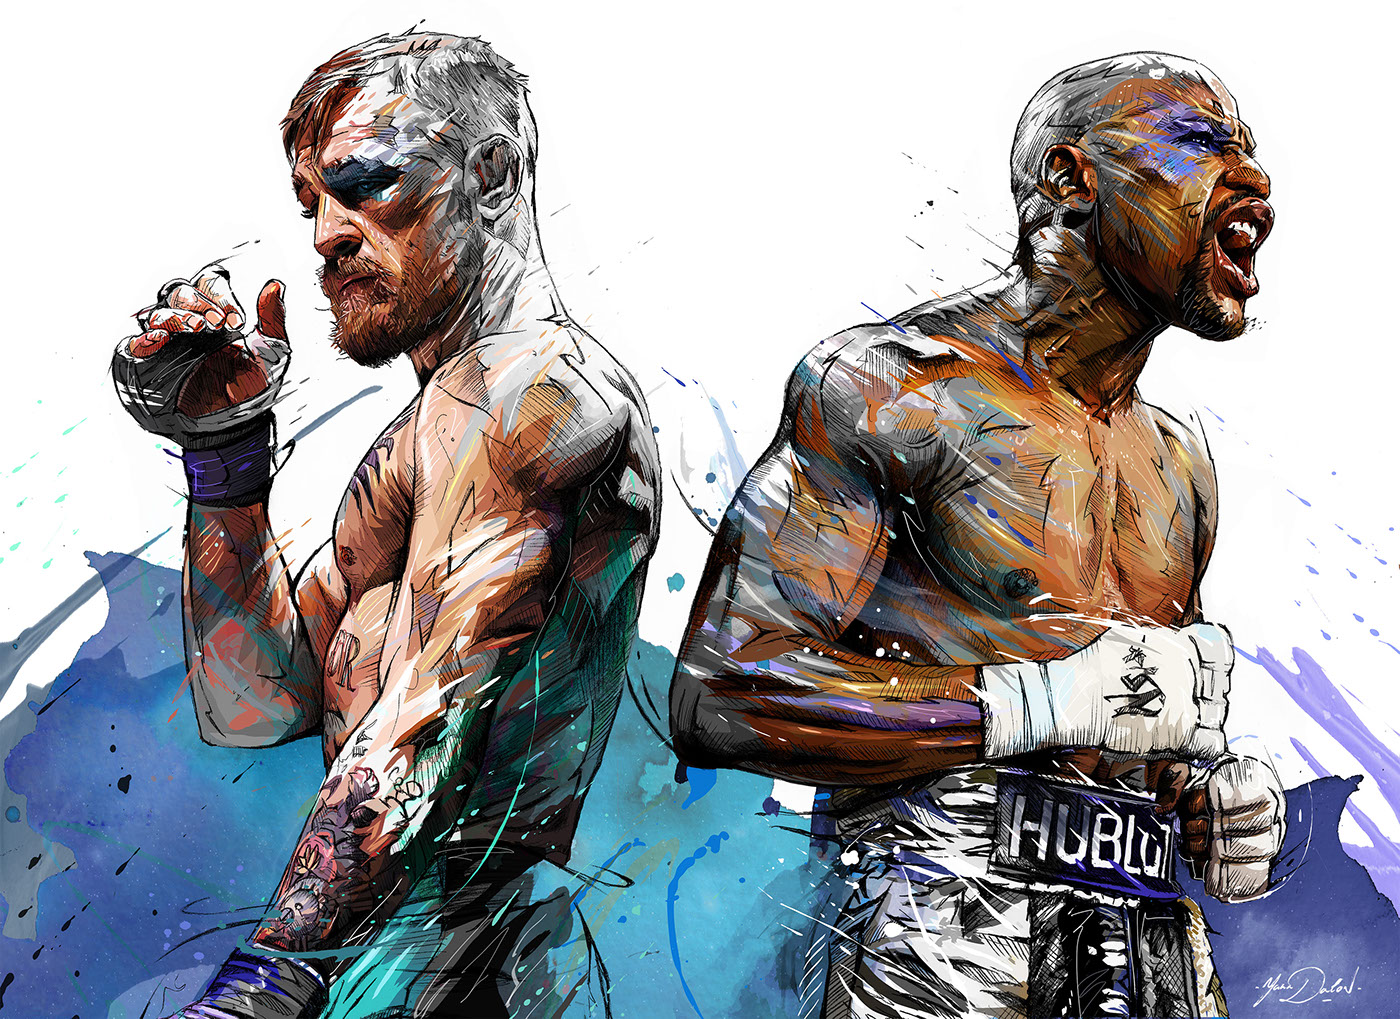 Conor McGregor Floyd Mayweather Rumble Boxing MMA UFC fight Dynamic portrait sport